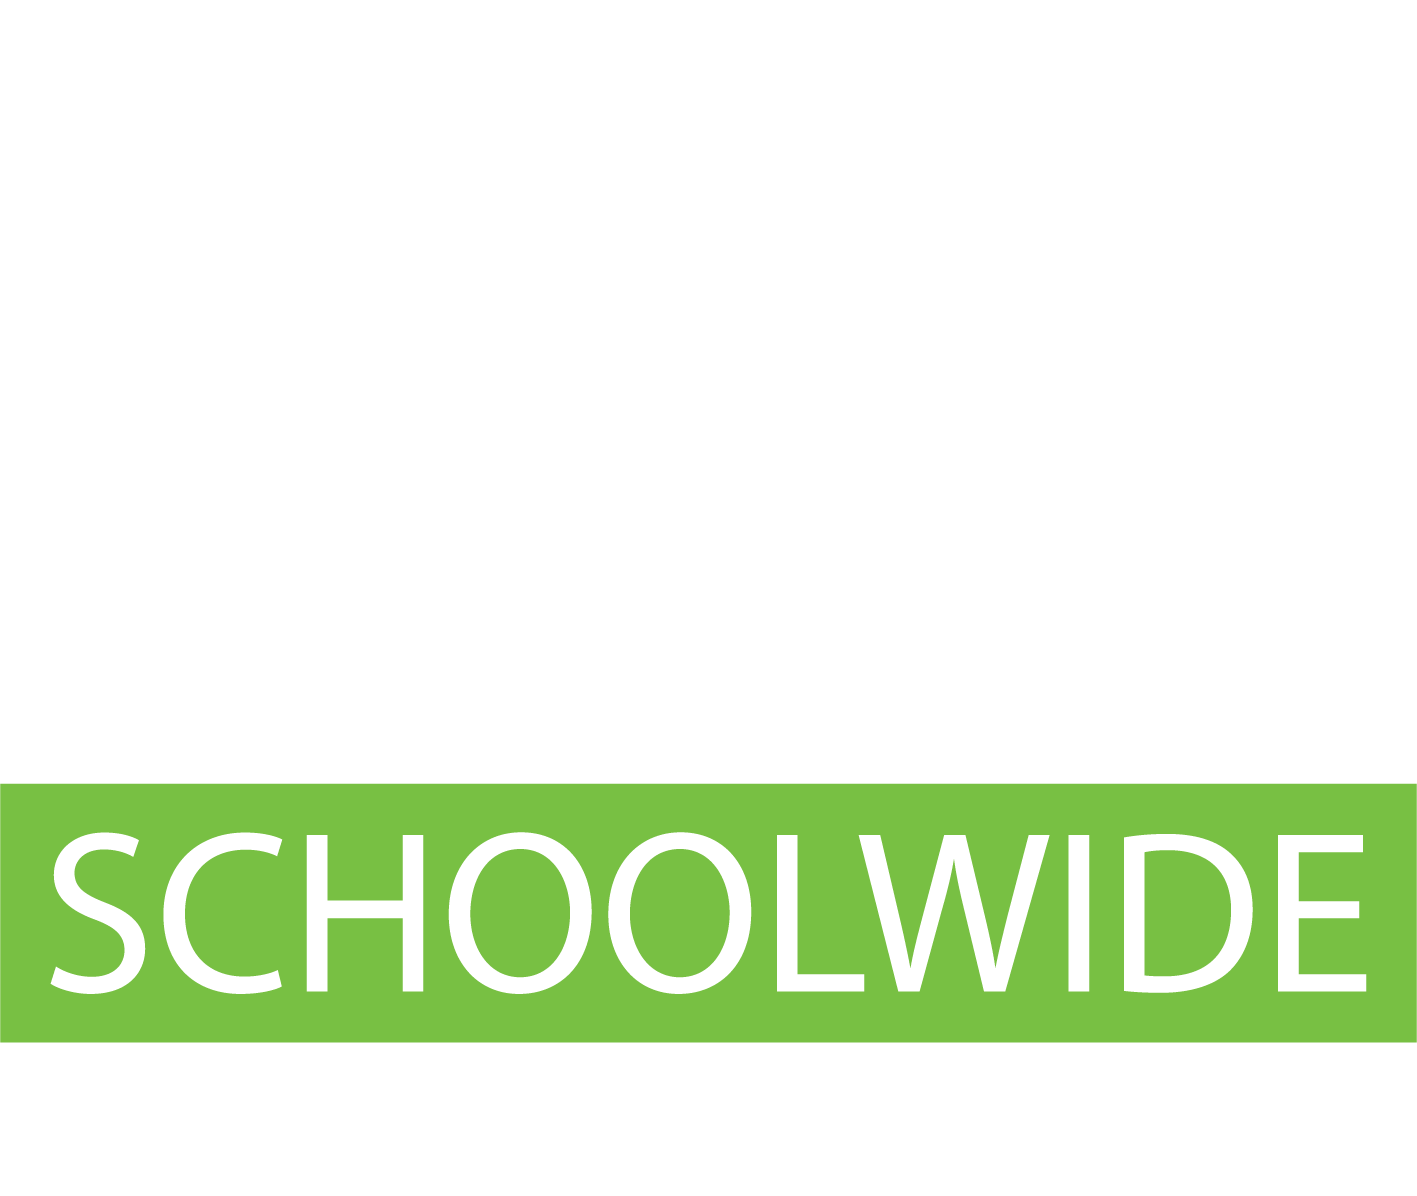 Why Use Schoolwide communication Education Paging and Intercom Communications